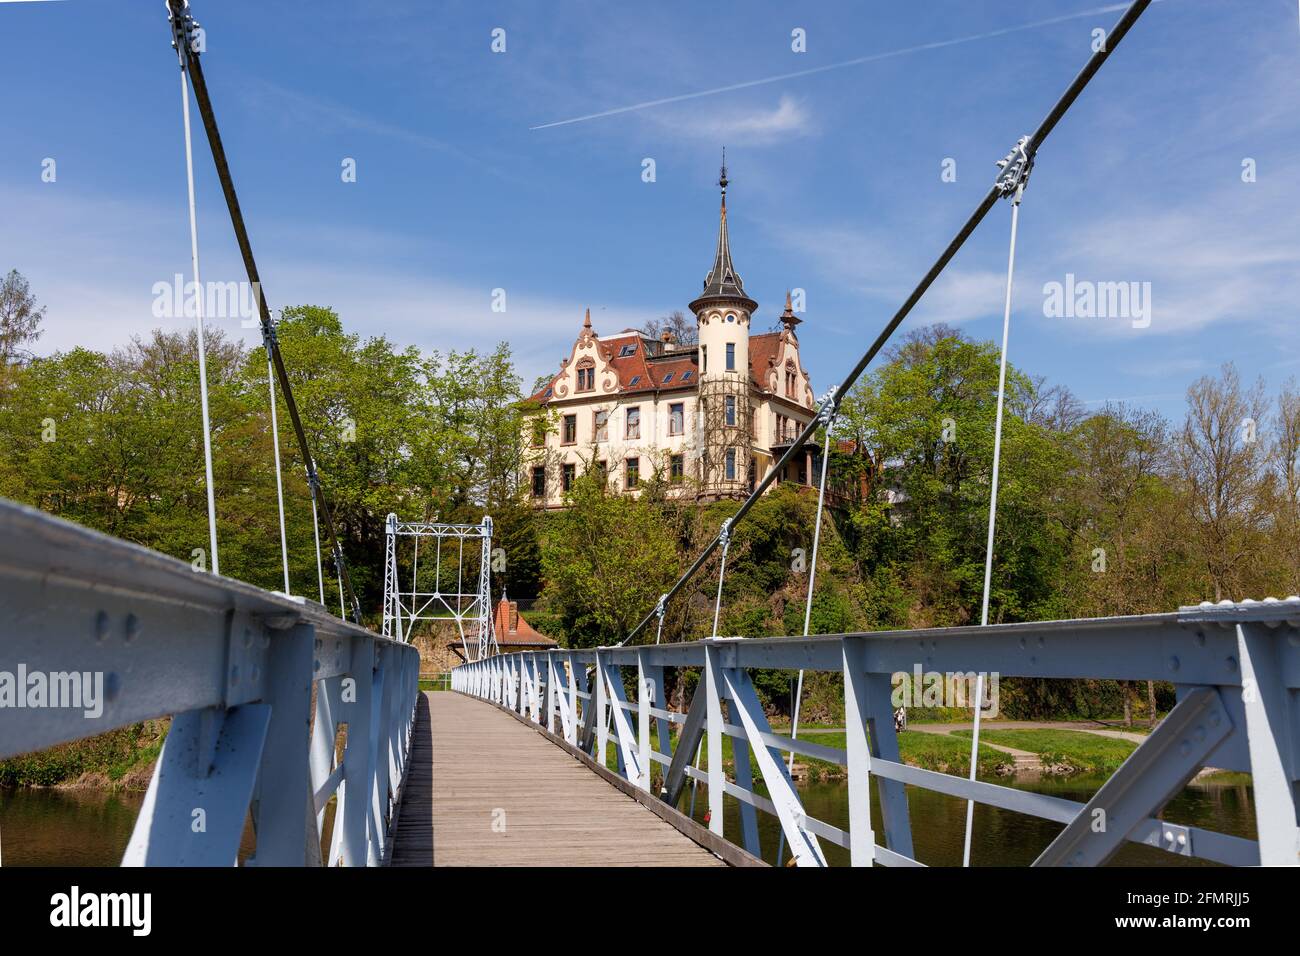 Grimma, Saxony, Germany- 05 11 2021, the small town on the river Mulde is known as the 'pearl of the Mulde valley'- suspension bridge near the histori Stock Photo